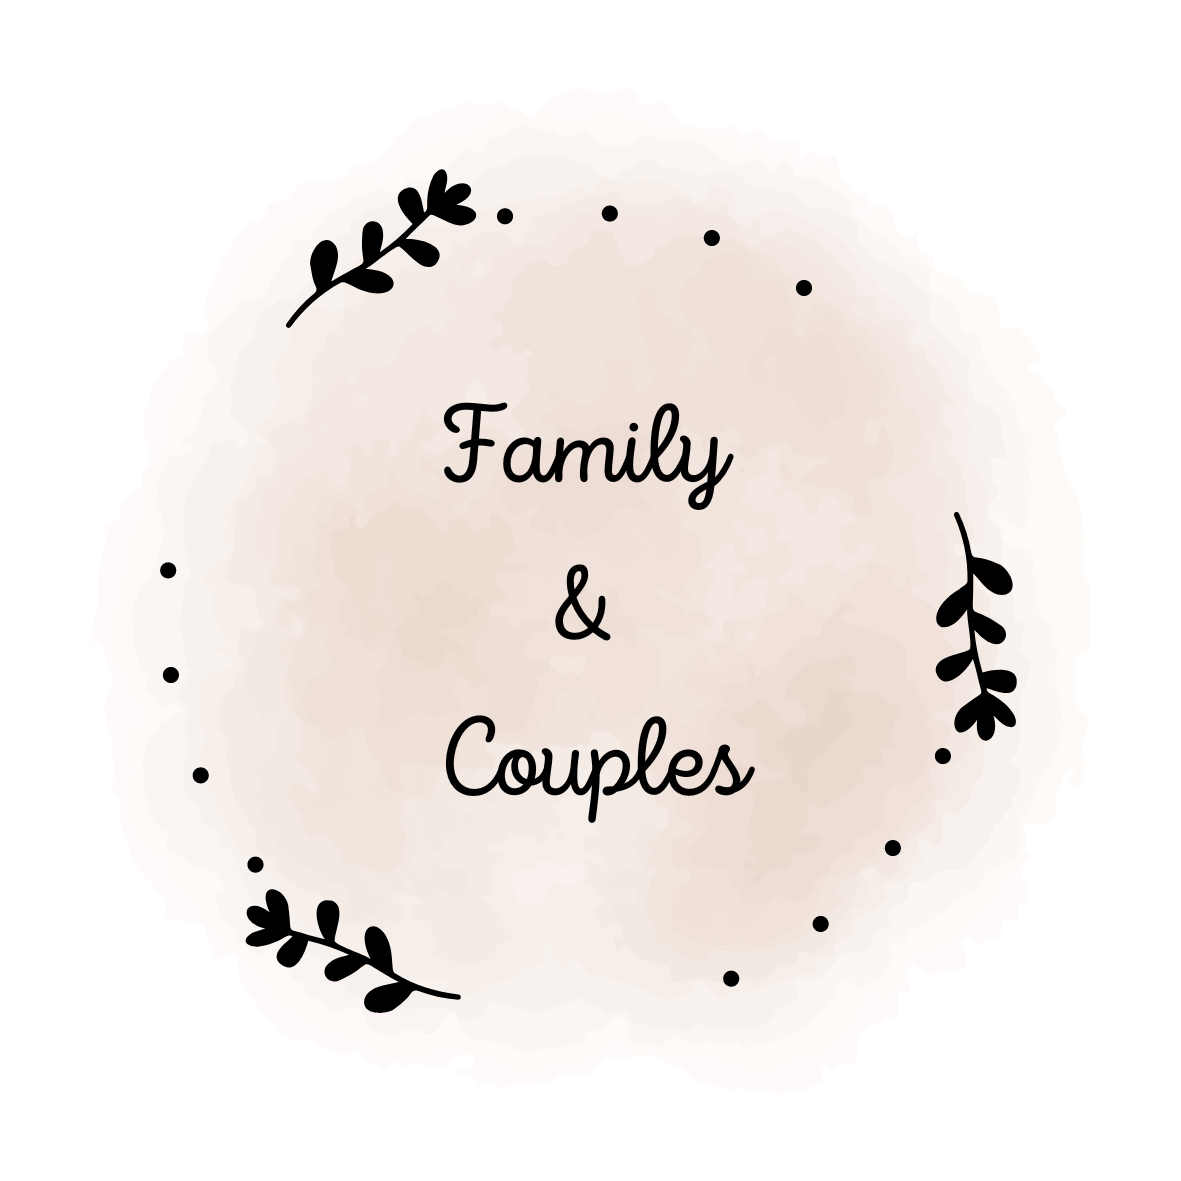 Family and Couples